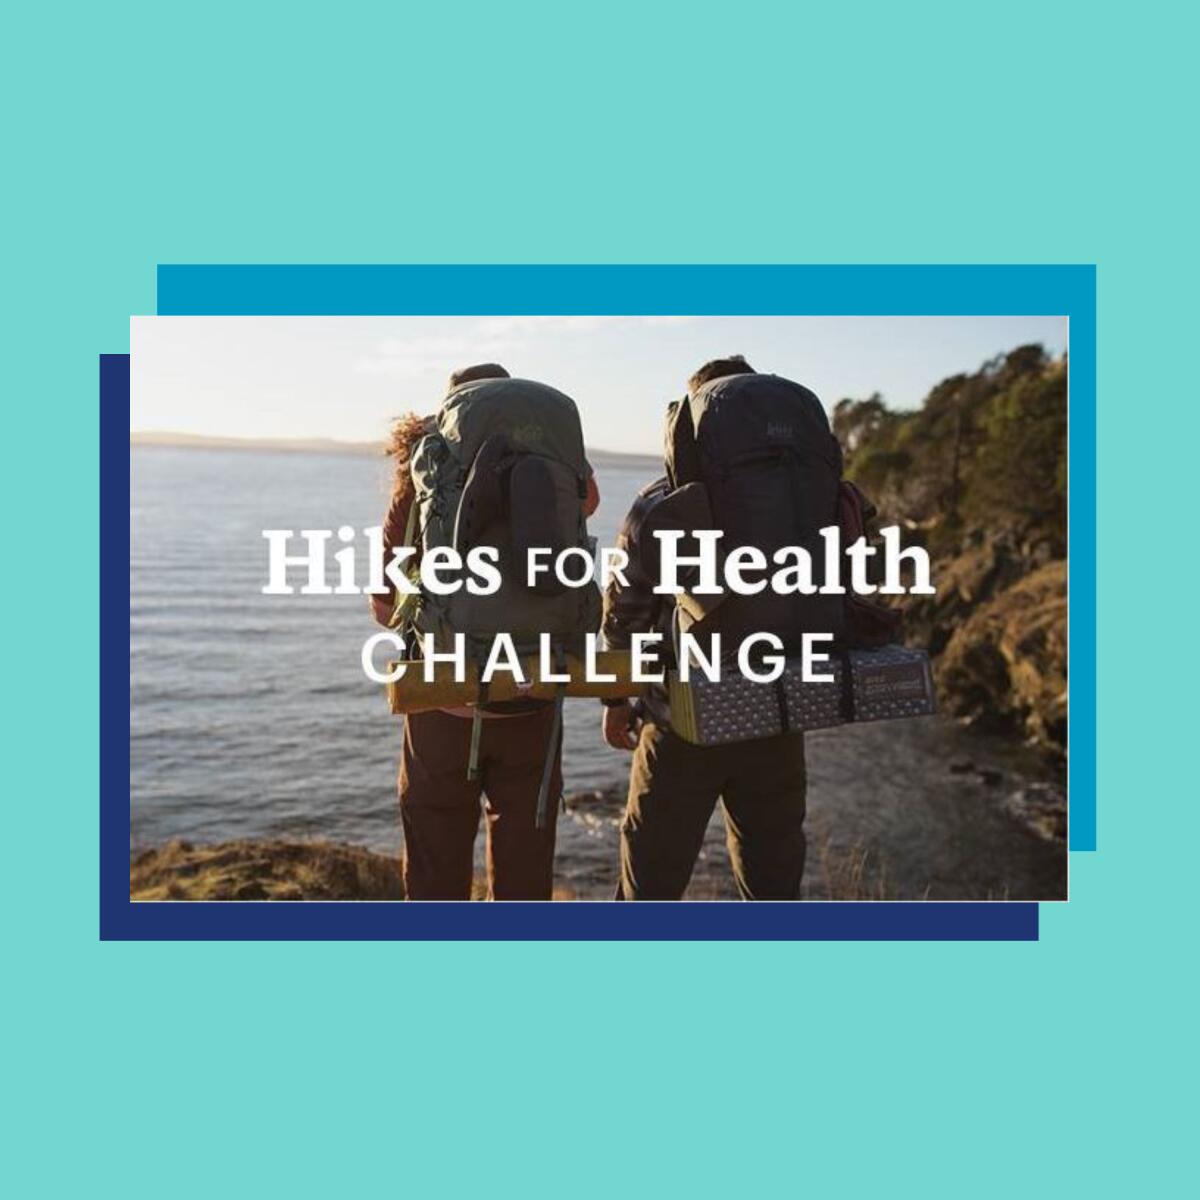 Two hikers overlooking the ocean under the words "Hikes for Health Challenge"